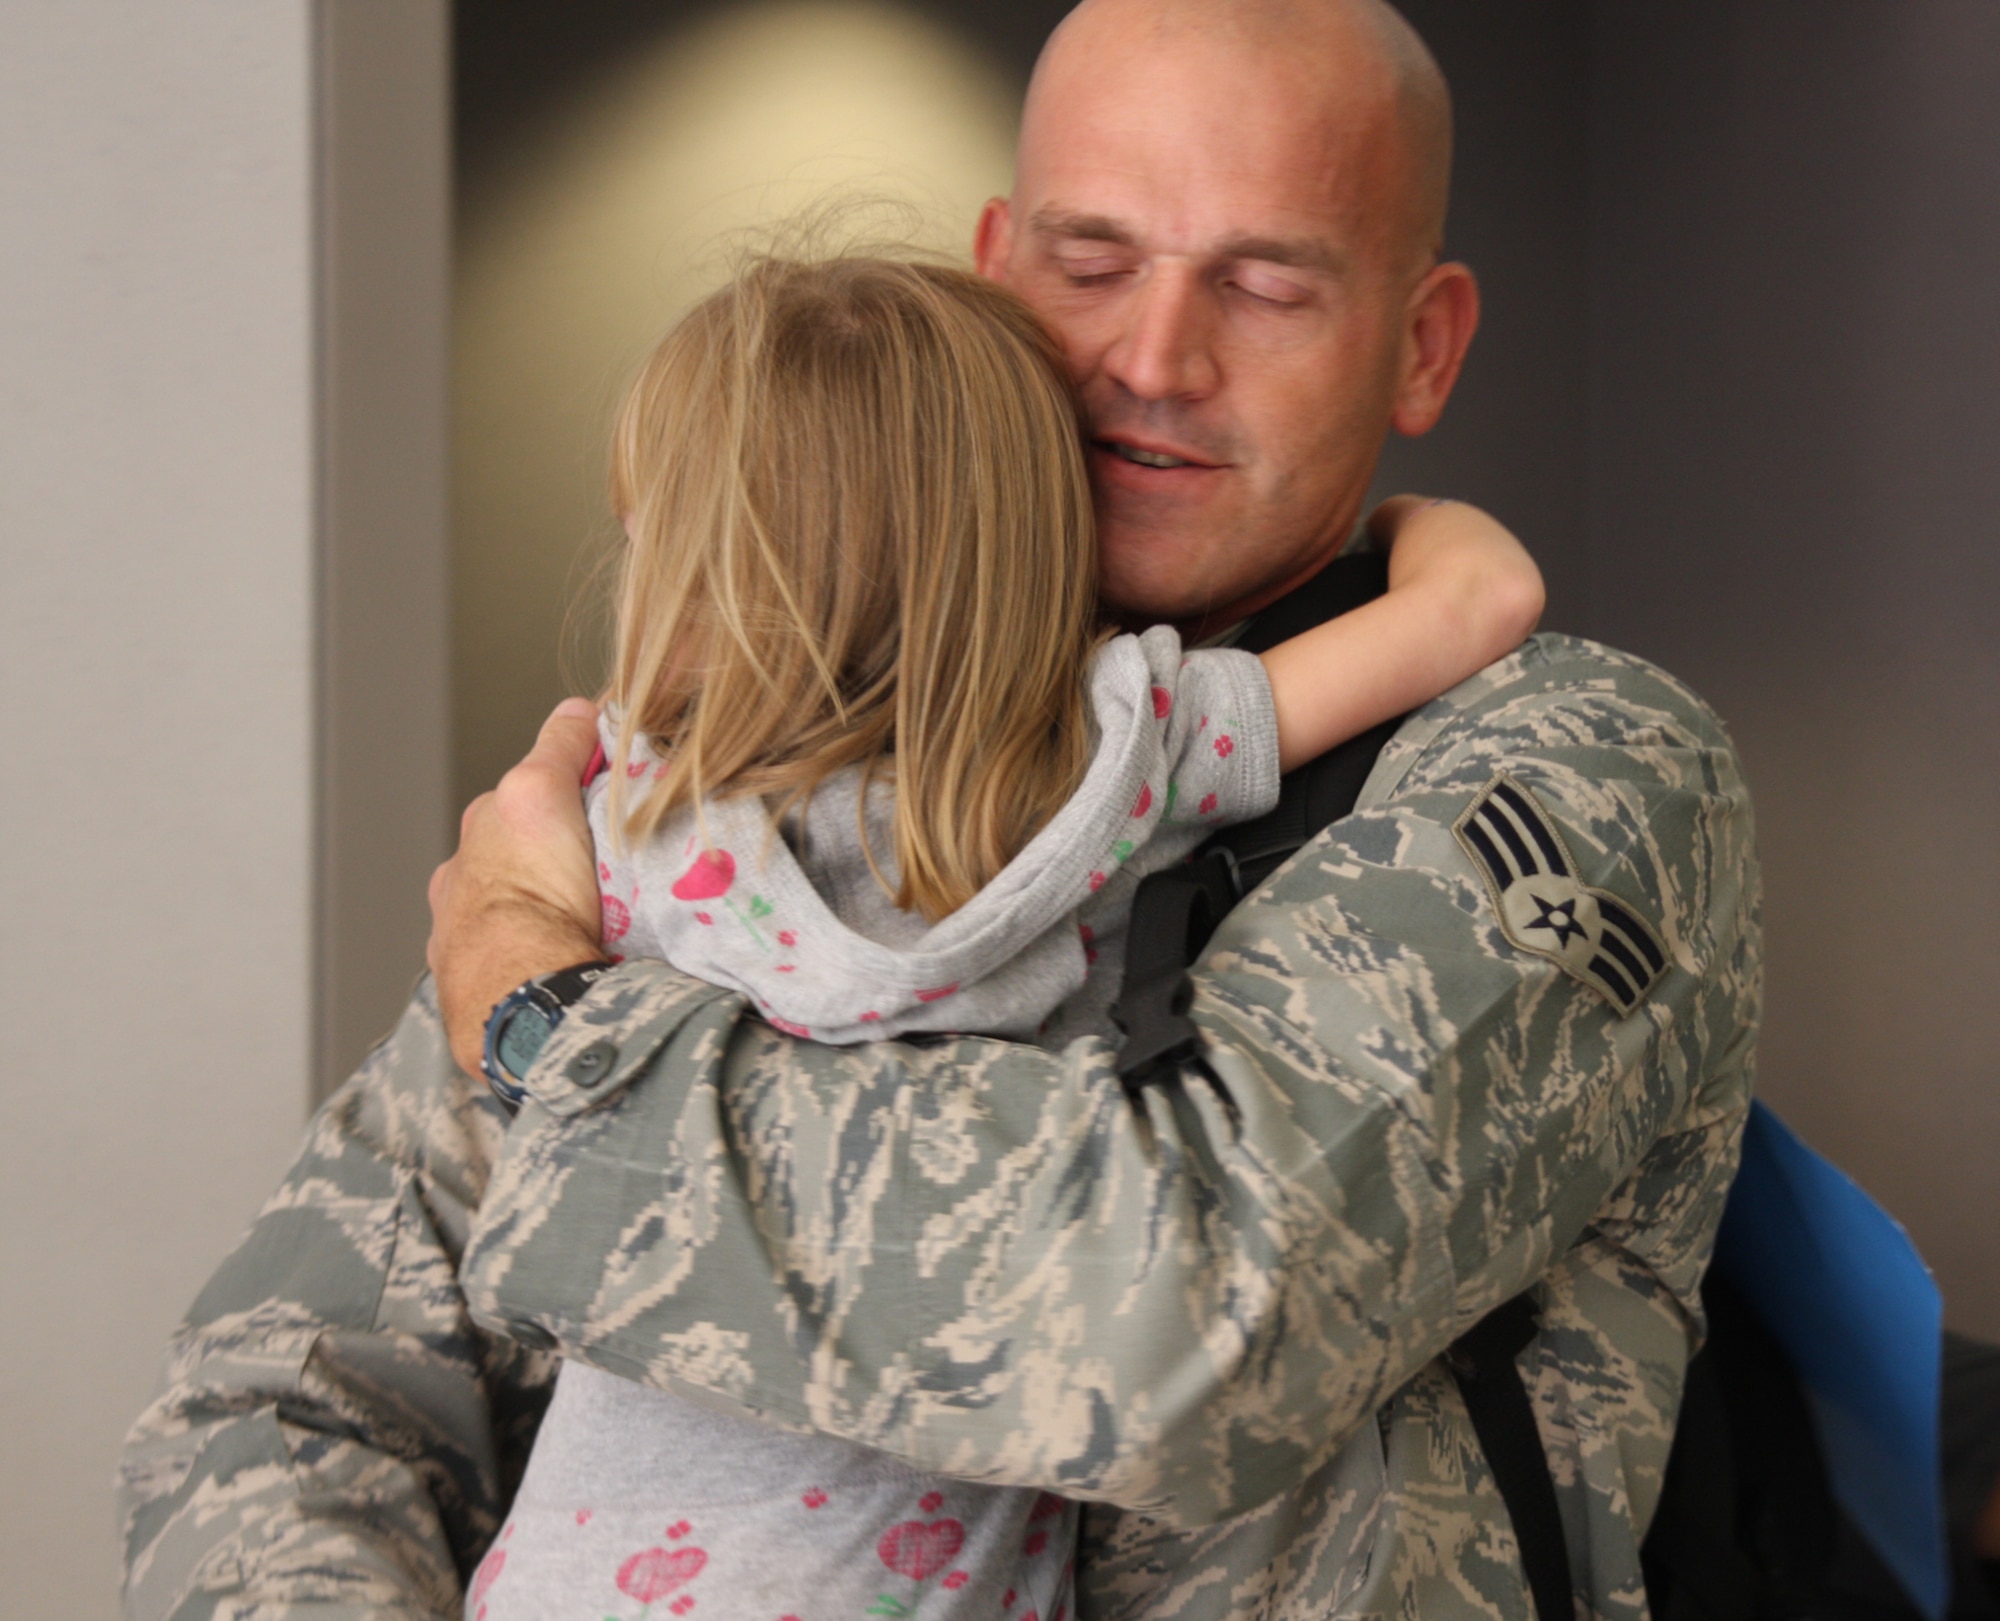 WRIGHT-PATTERSON AFB, Ohio - Senior Airman Steven Sherman, 87th Aerial Port Squadron, hugs his daughter Amelia, upon his return from a six-month deployment to Balad Air Base, Iraq.  More than 50 squadron members deployed to Southwest Asia this spring and will be returning throughout the month of September. (Air Force photo/Maj, Cynthia Harris)